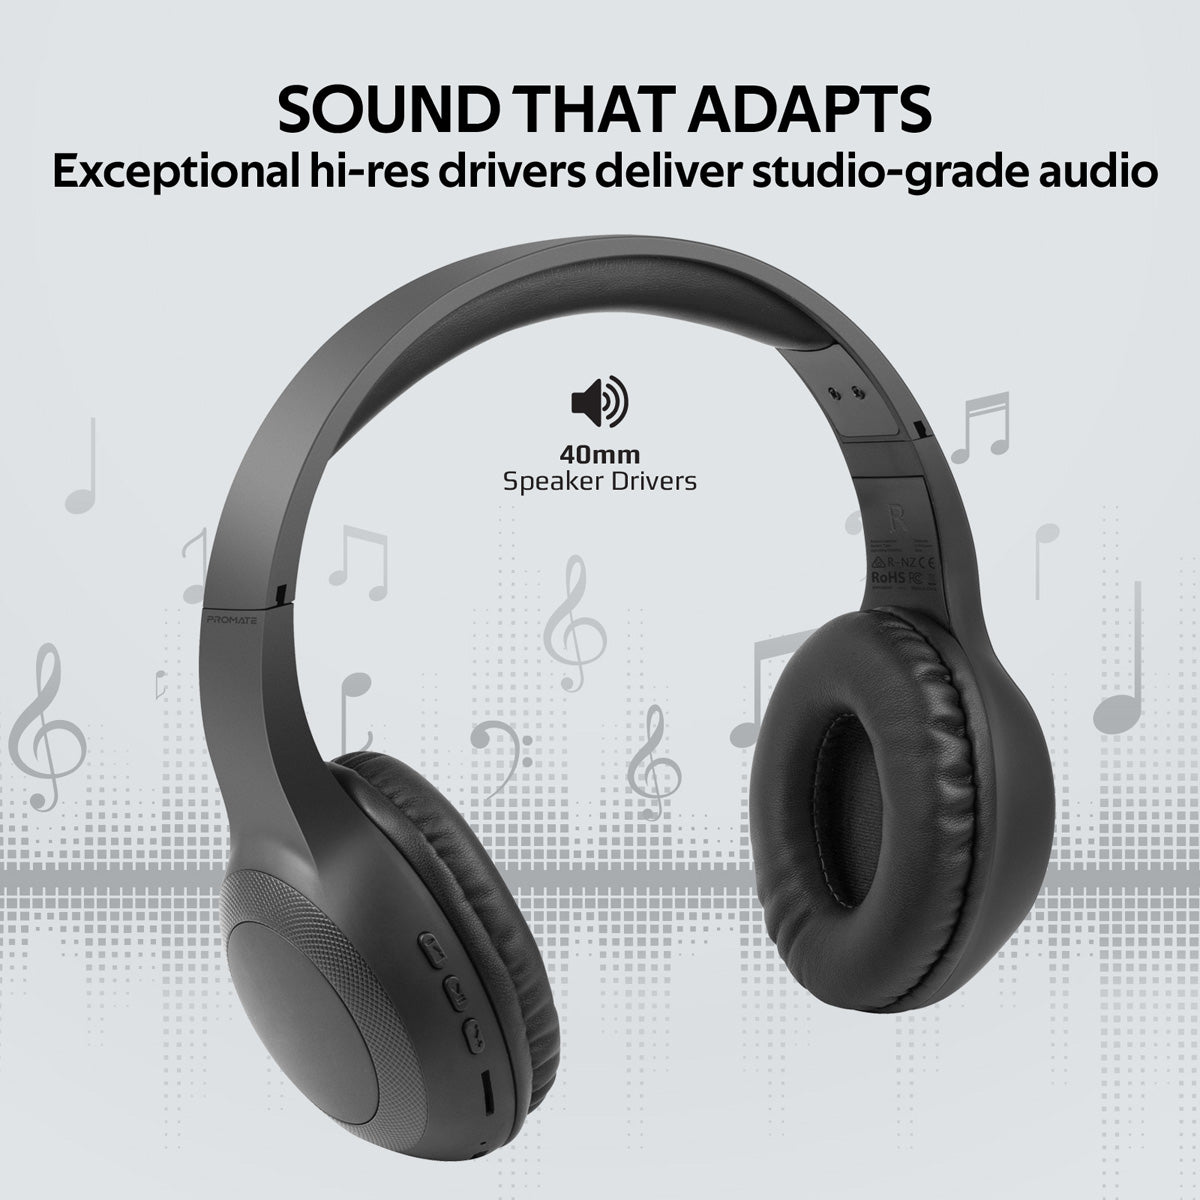 Promate - Bluetooth Headphone, Over-Ear Deep Bass Wired/Wireless Headphone with Long Paytime, Hi-Fi Sound, Built-In Mic, On-Ear Controls, Soft Earpads, MicroSD Card Slot and AUX Port for iPhone, Samsung, iPad Pro, LaBoca Black